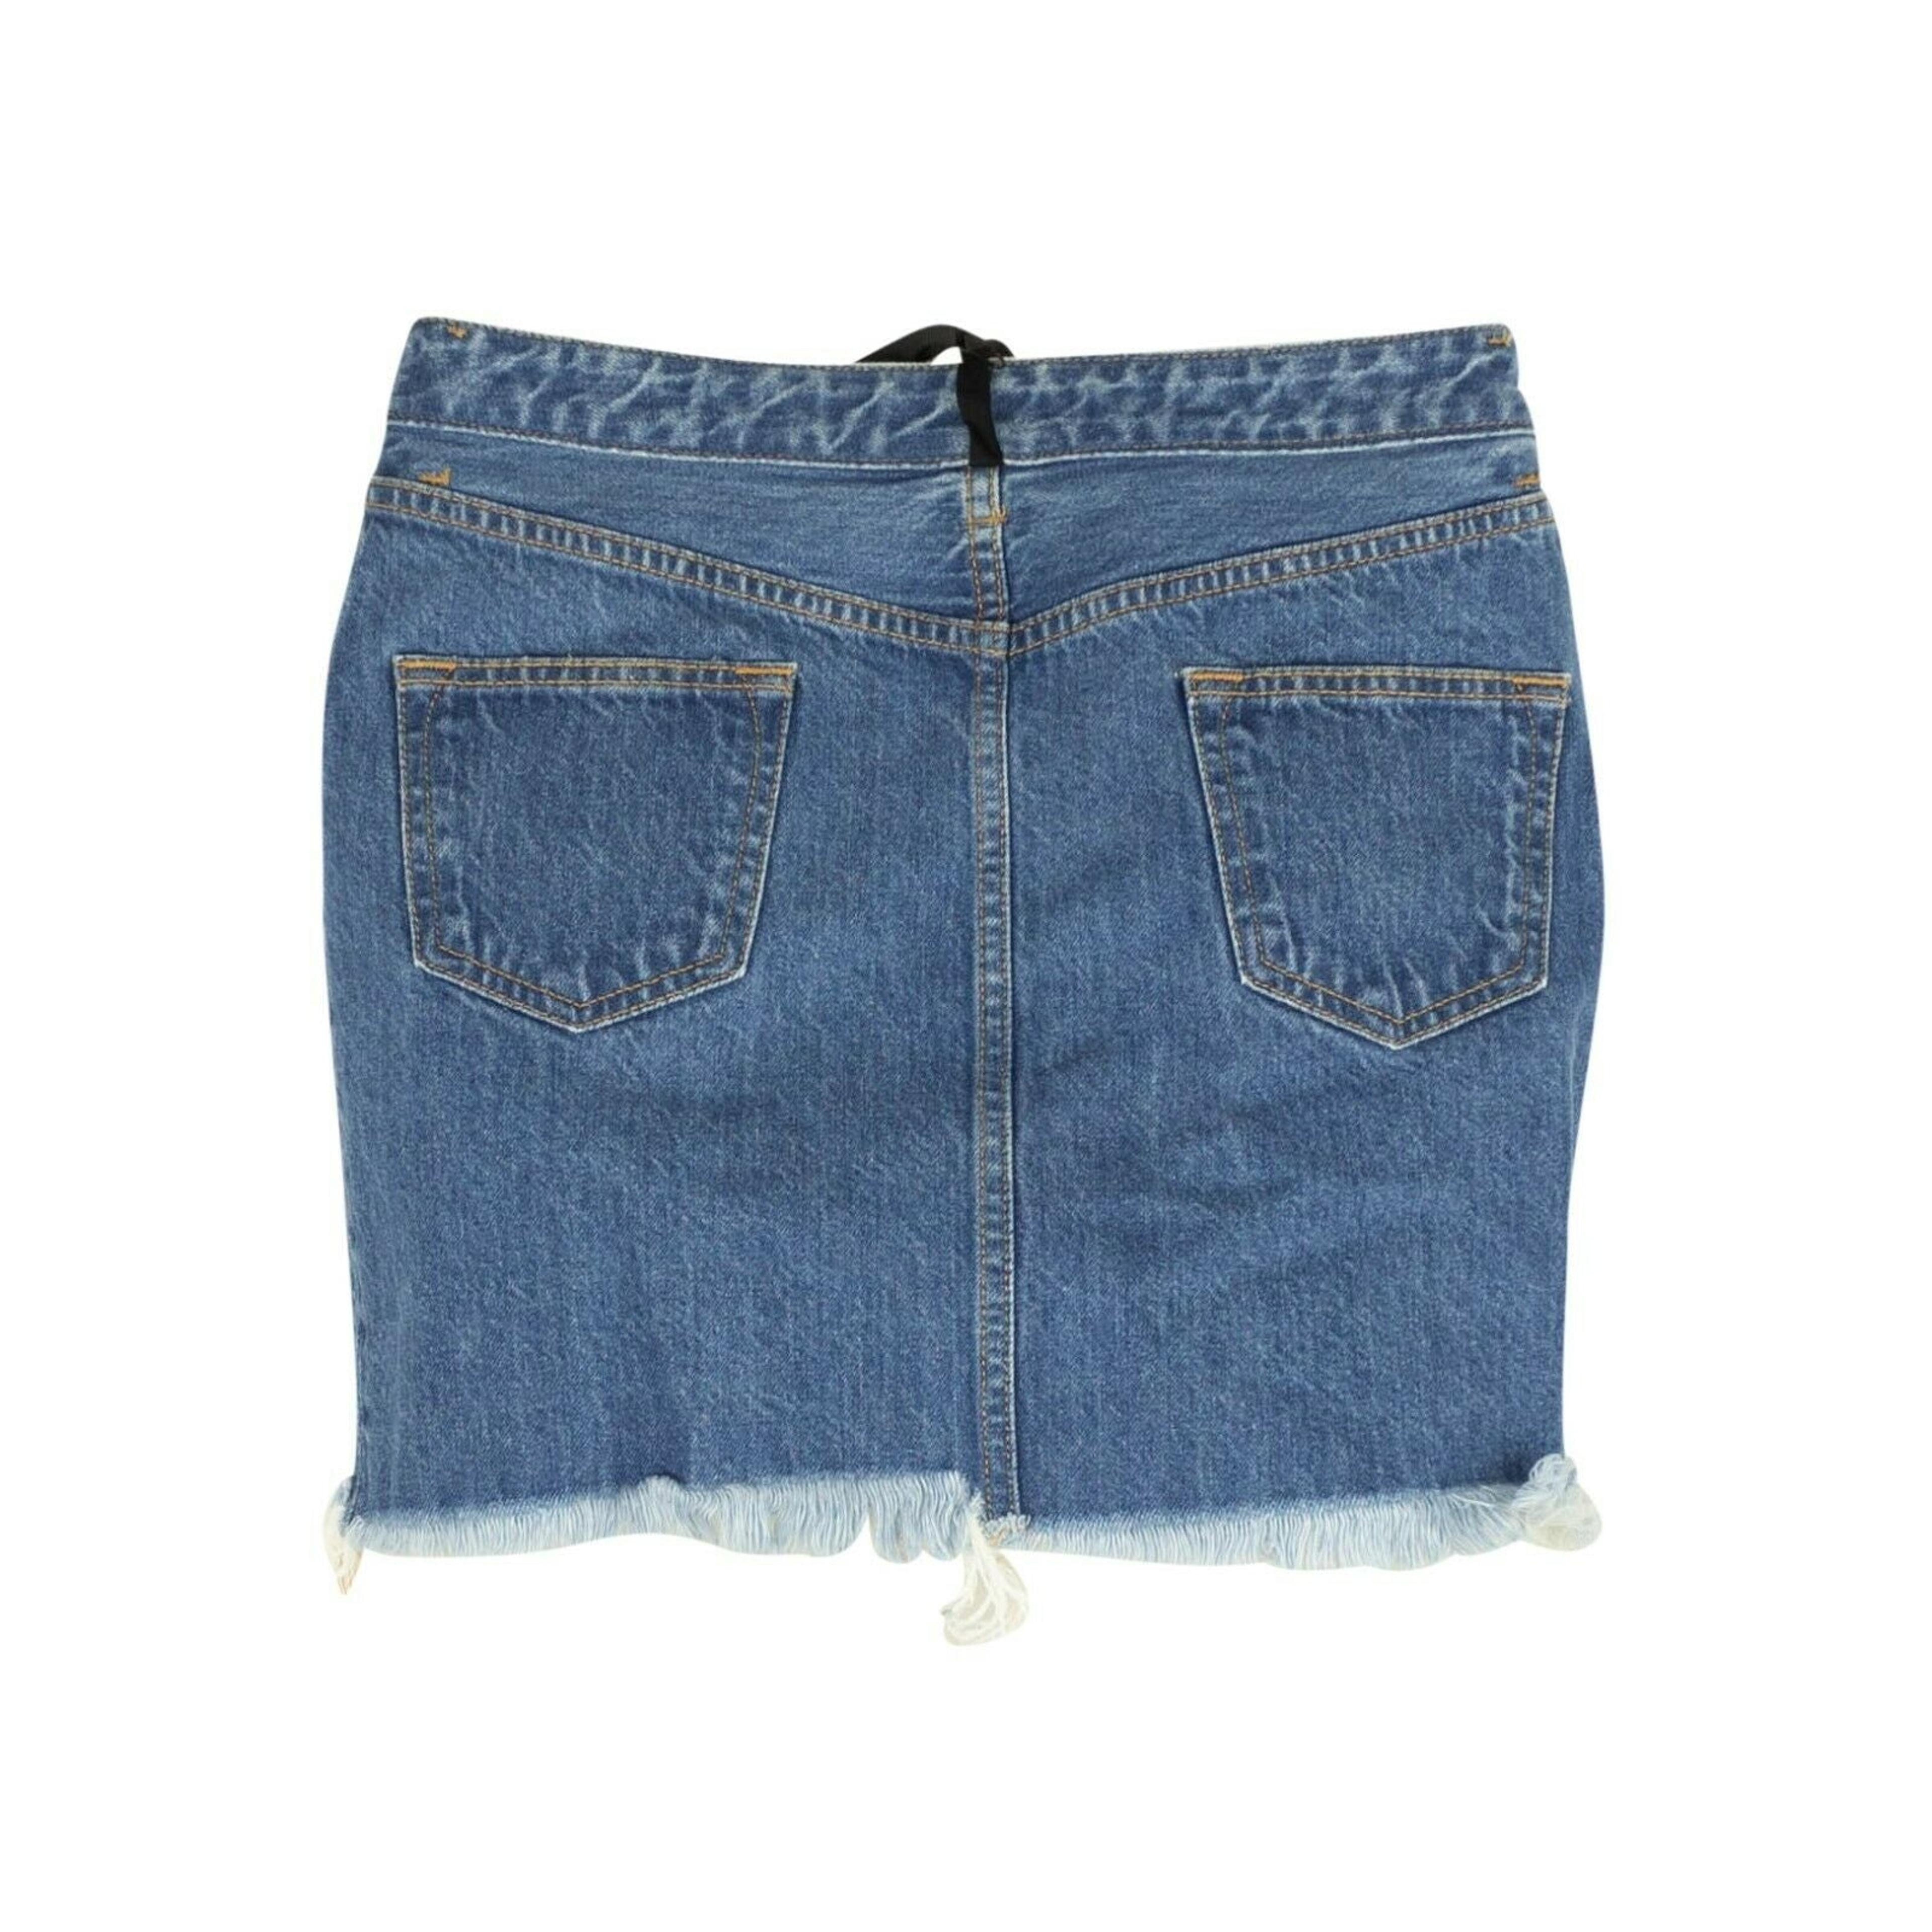 Alternate View 1 of Unravel Project Wash Tulle Denim Mini Skirt - Blue